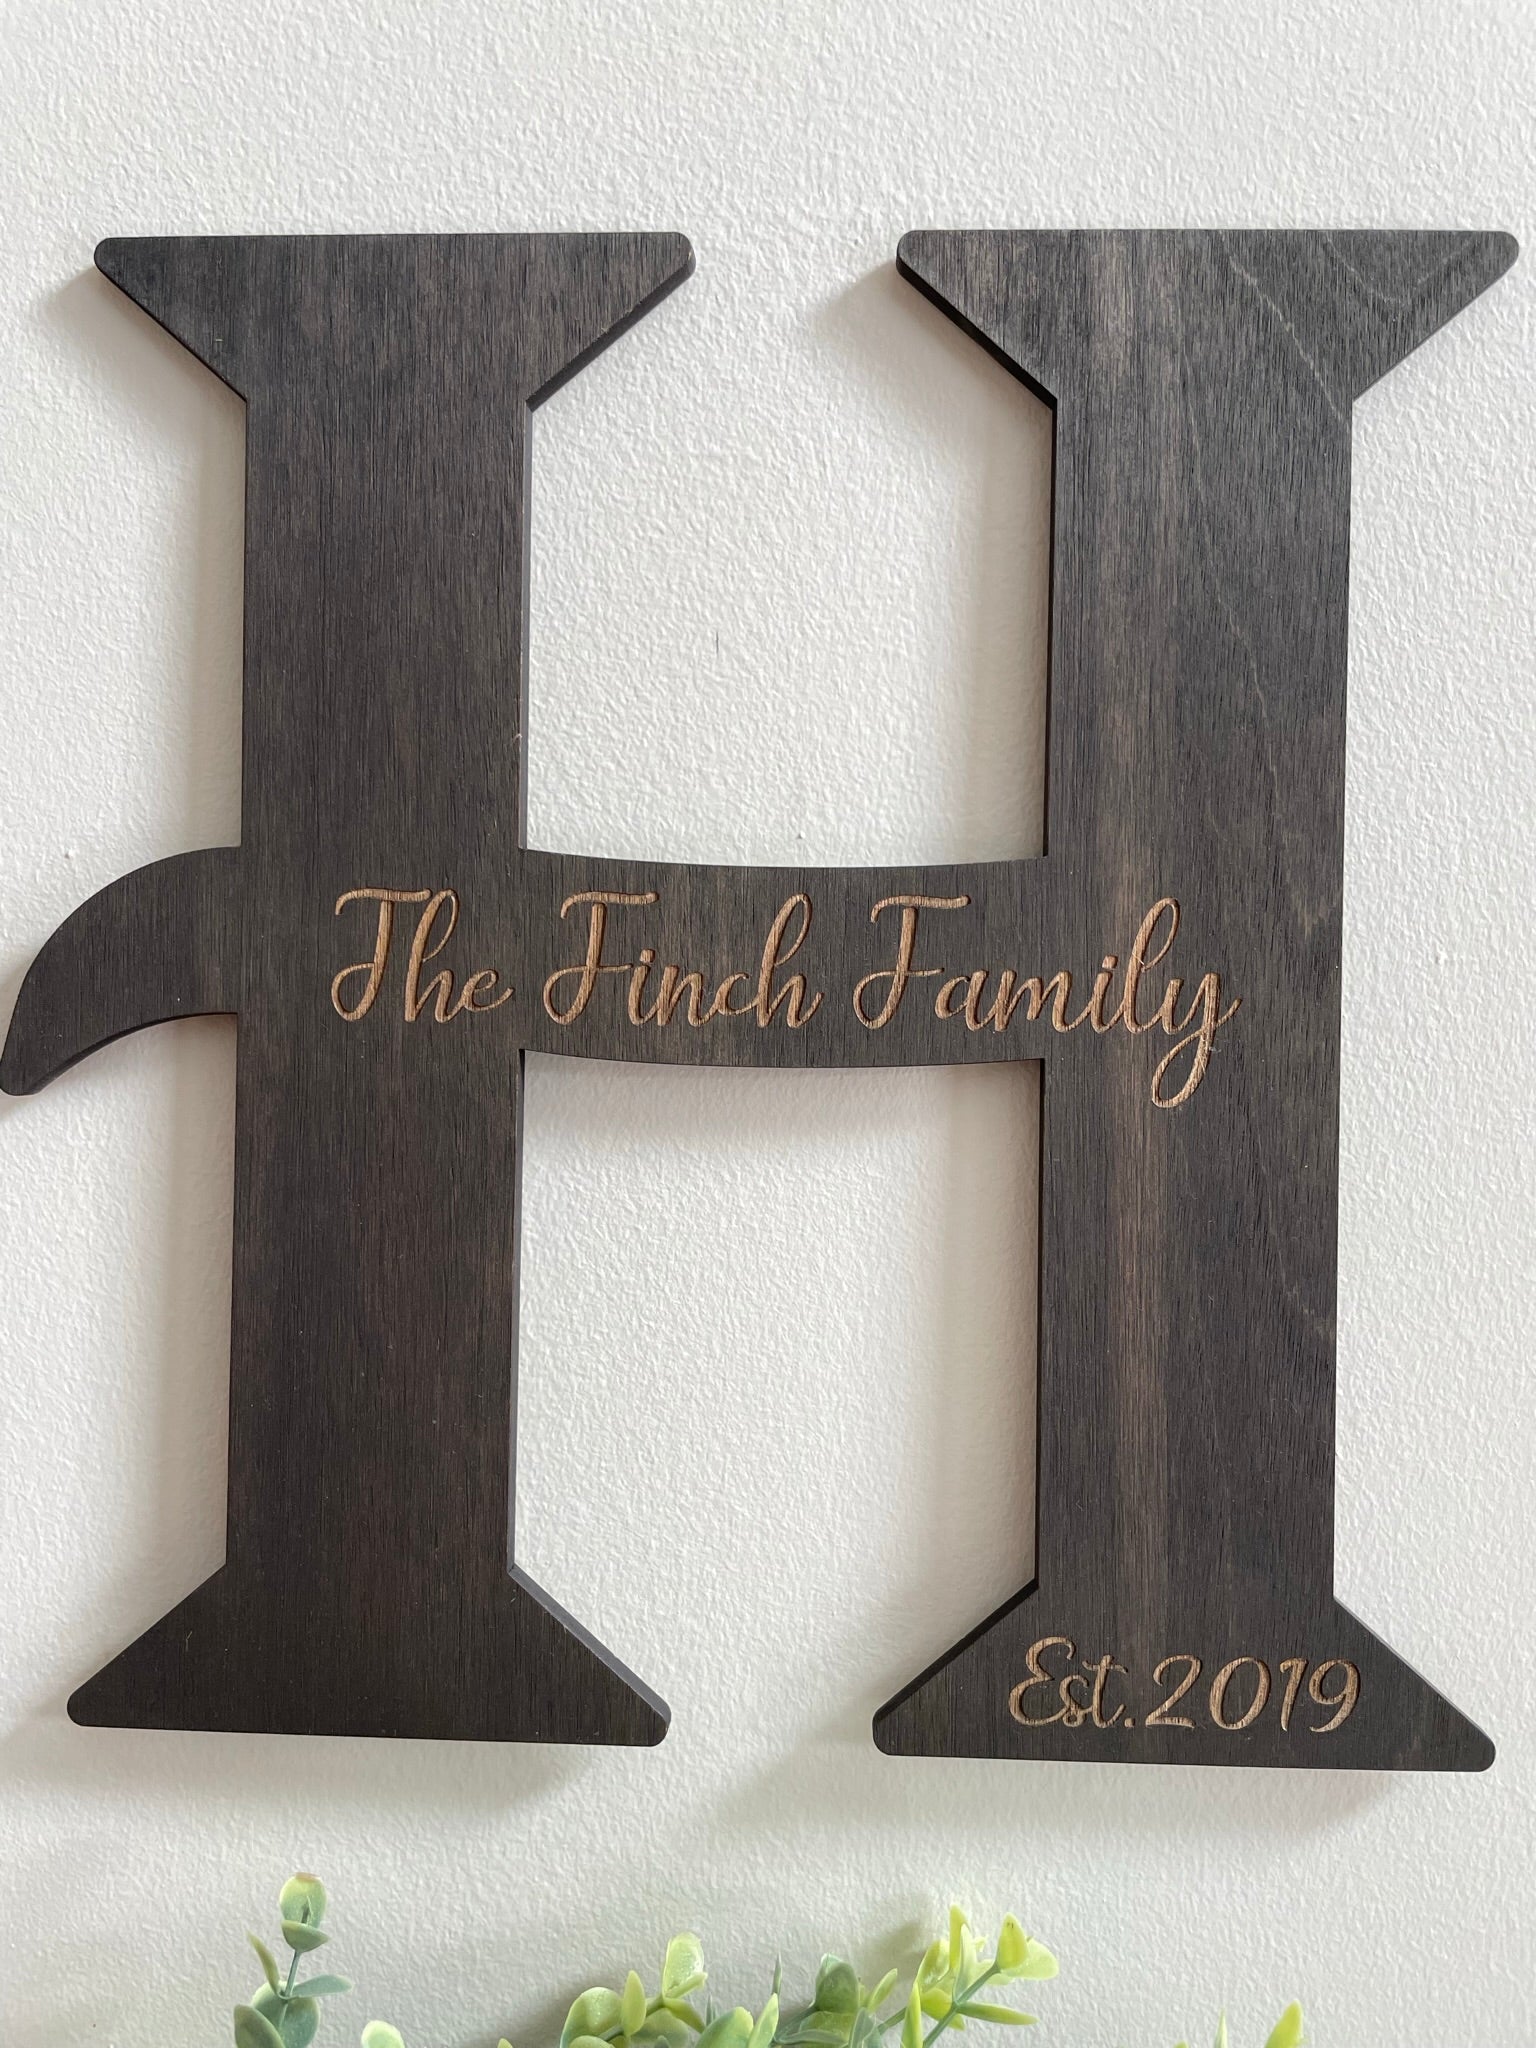 Welcome to our Home Door Sign, Engraved Personalization – DeluxHub